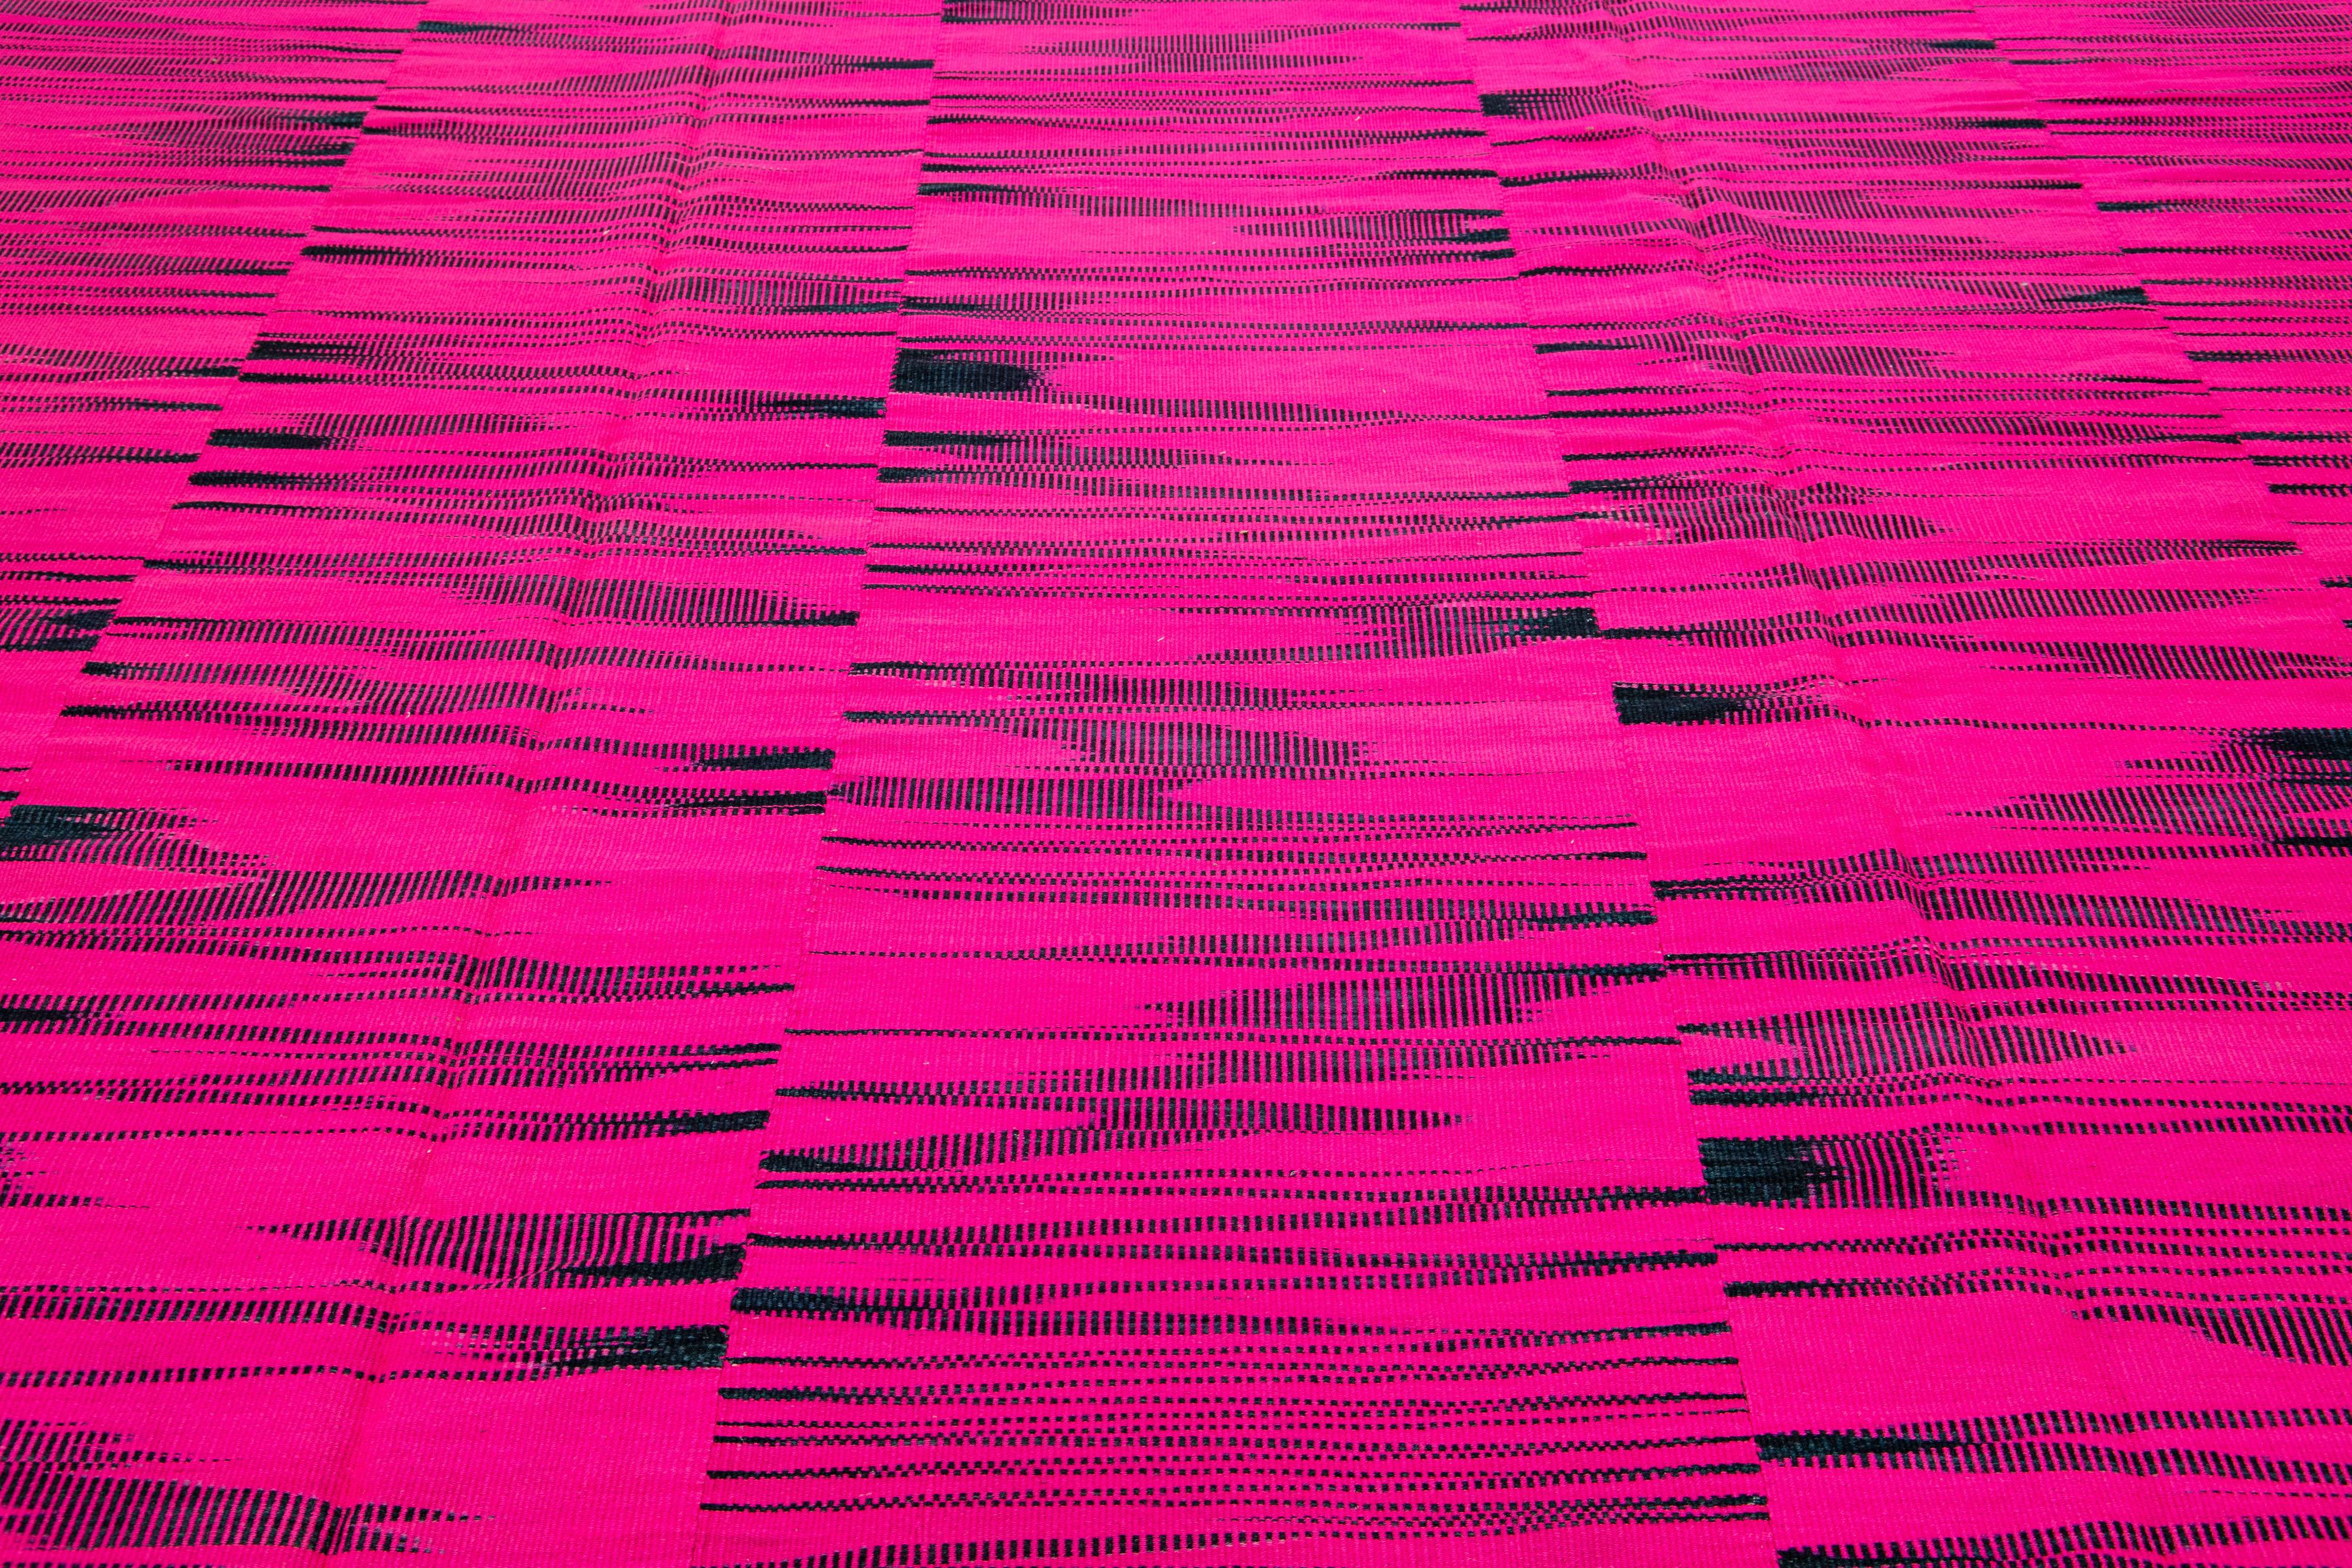 This contemporary Turkish kilim rug, crafted in the 21st century, features a vibrant highlighter-pink field adorned with an all-over abstract geometric design composed of interlocking black stripes.

This rug measures 11'4